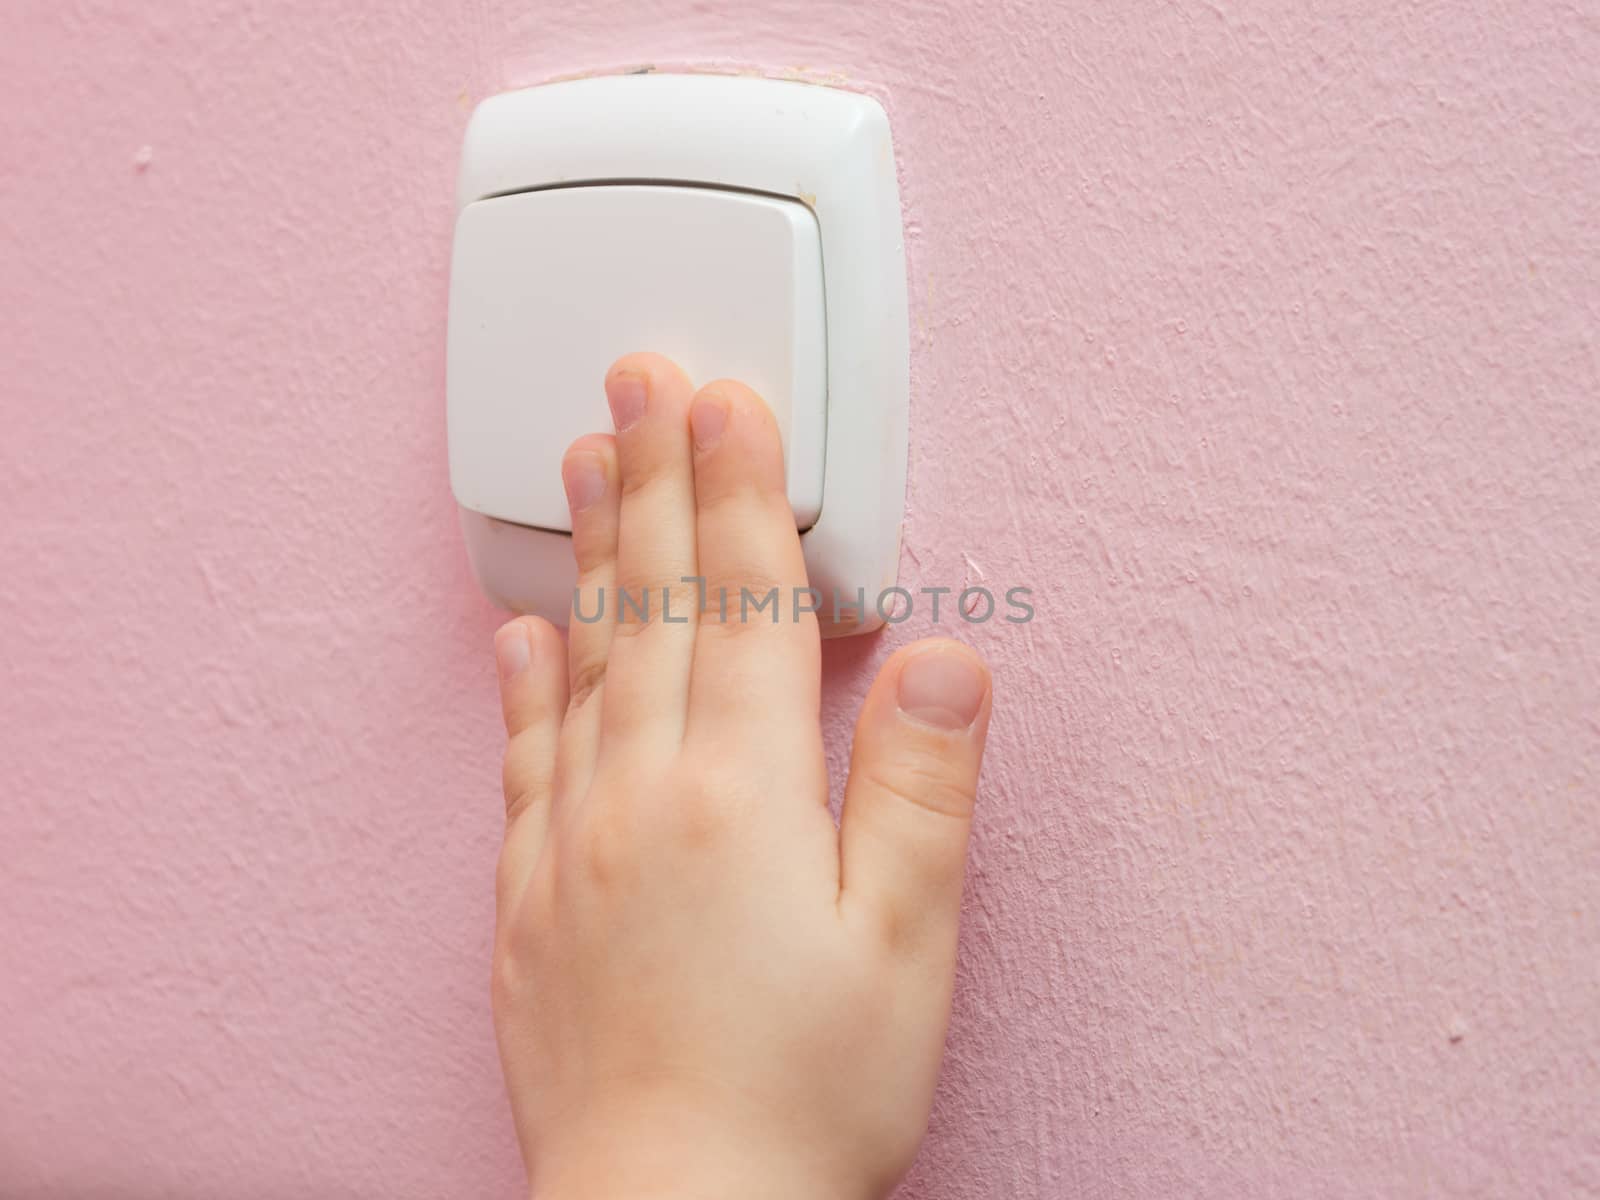 Child's hand presses the light switch, close-up